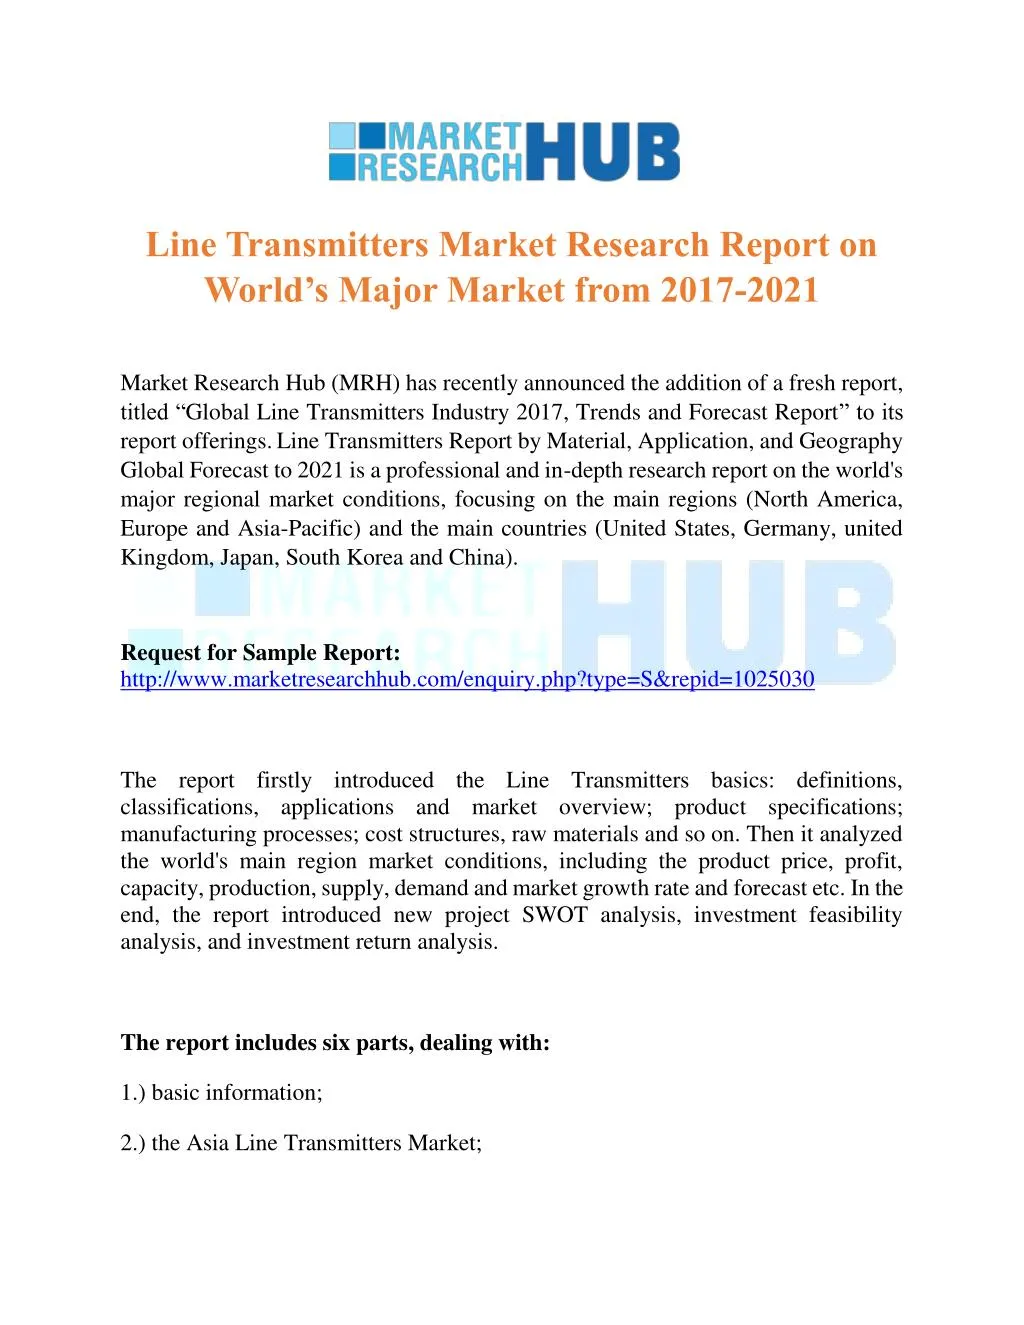 line transmitters market research report on world